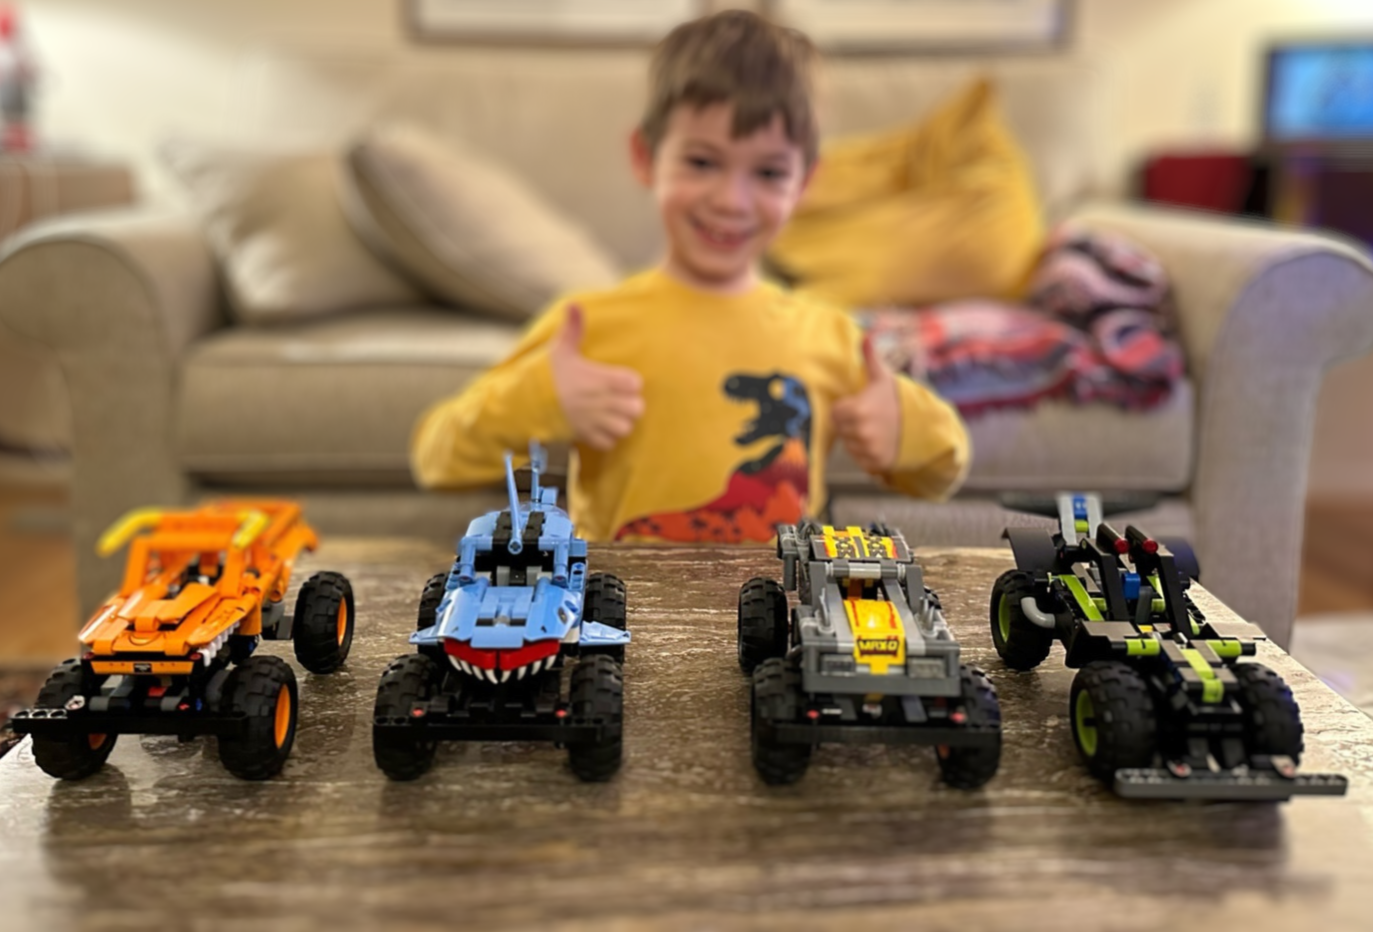 LEGO cars and the young Saturday Academy camper that built them